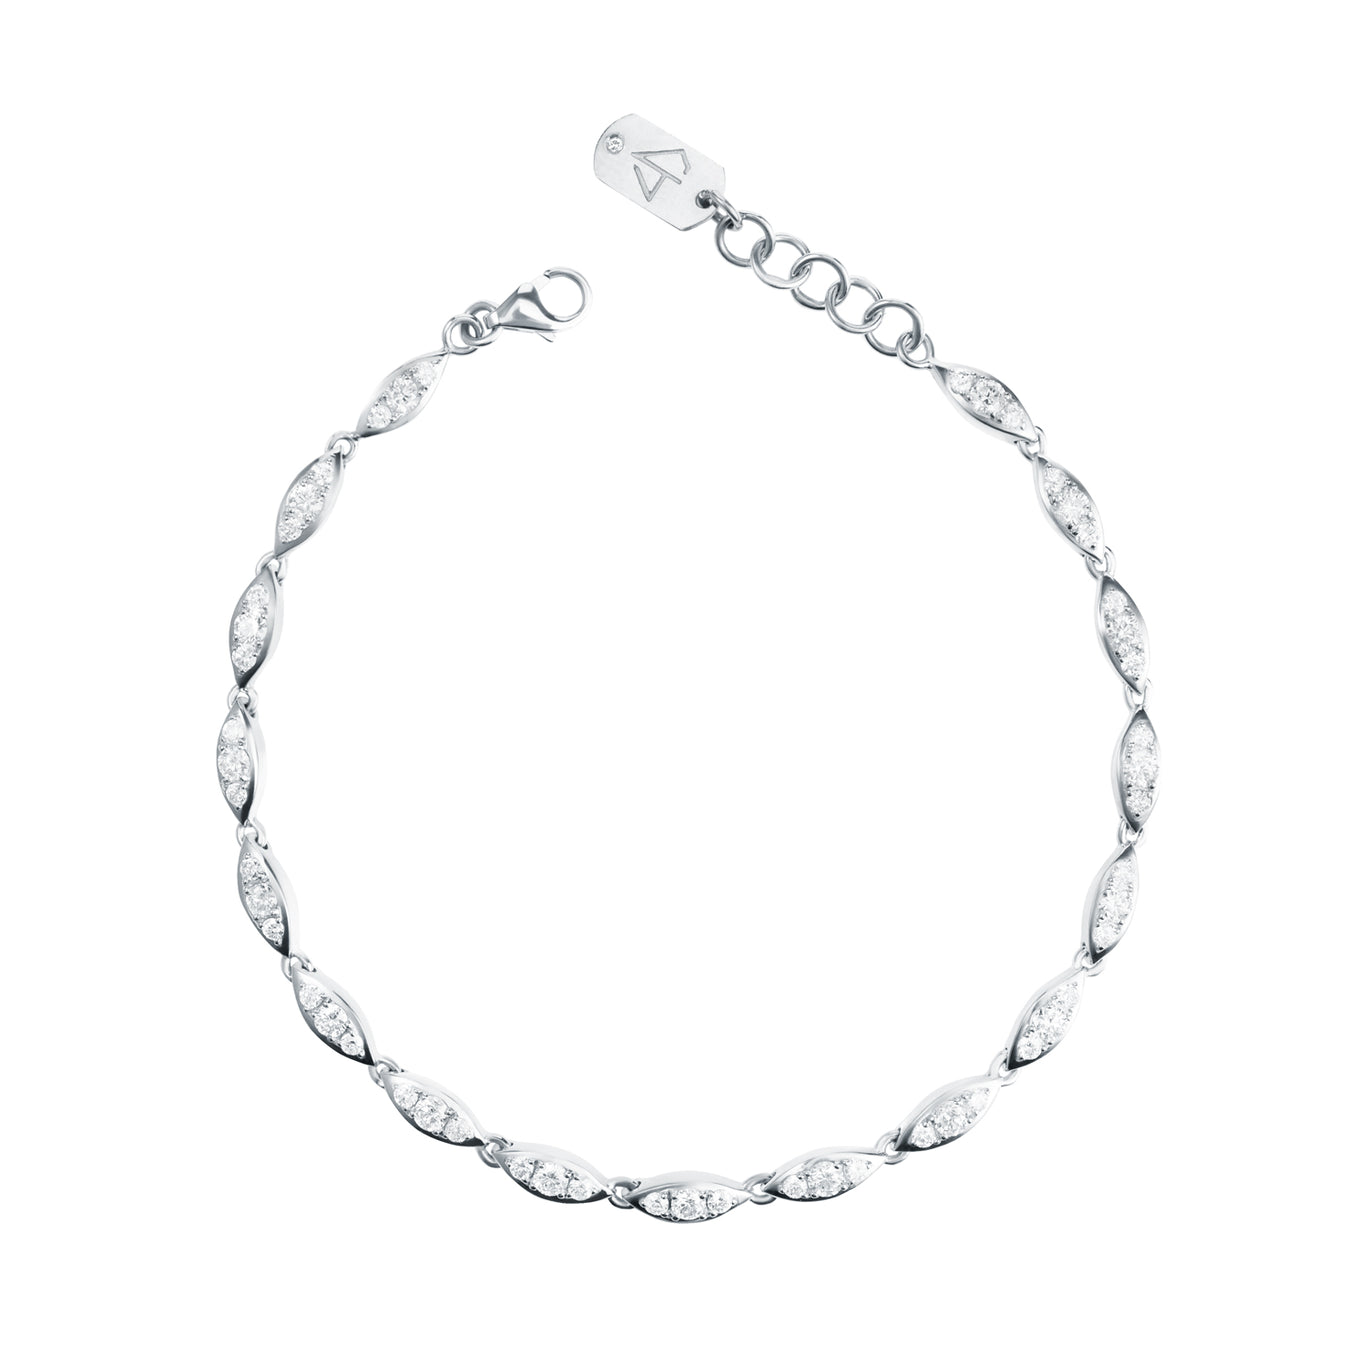 Necklace Extender White Gold Chain Extender 925 Sterling Silver Necklace  Bracelet Anklet Extenders Chain Extension for Jewelry Making (1 2 3 inch) -  Walmart.com